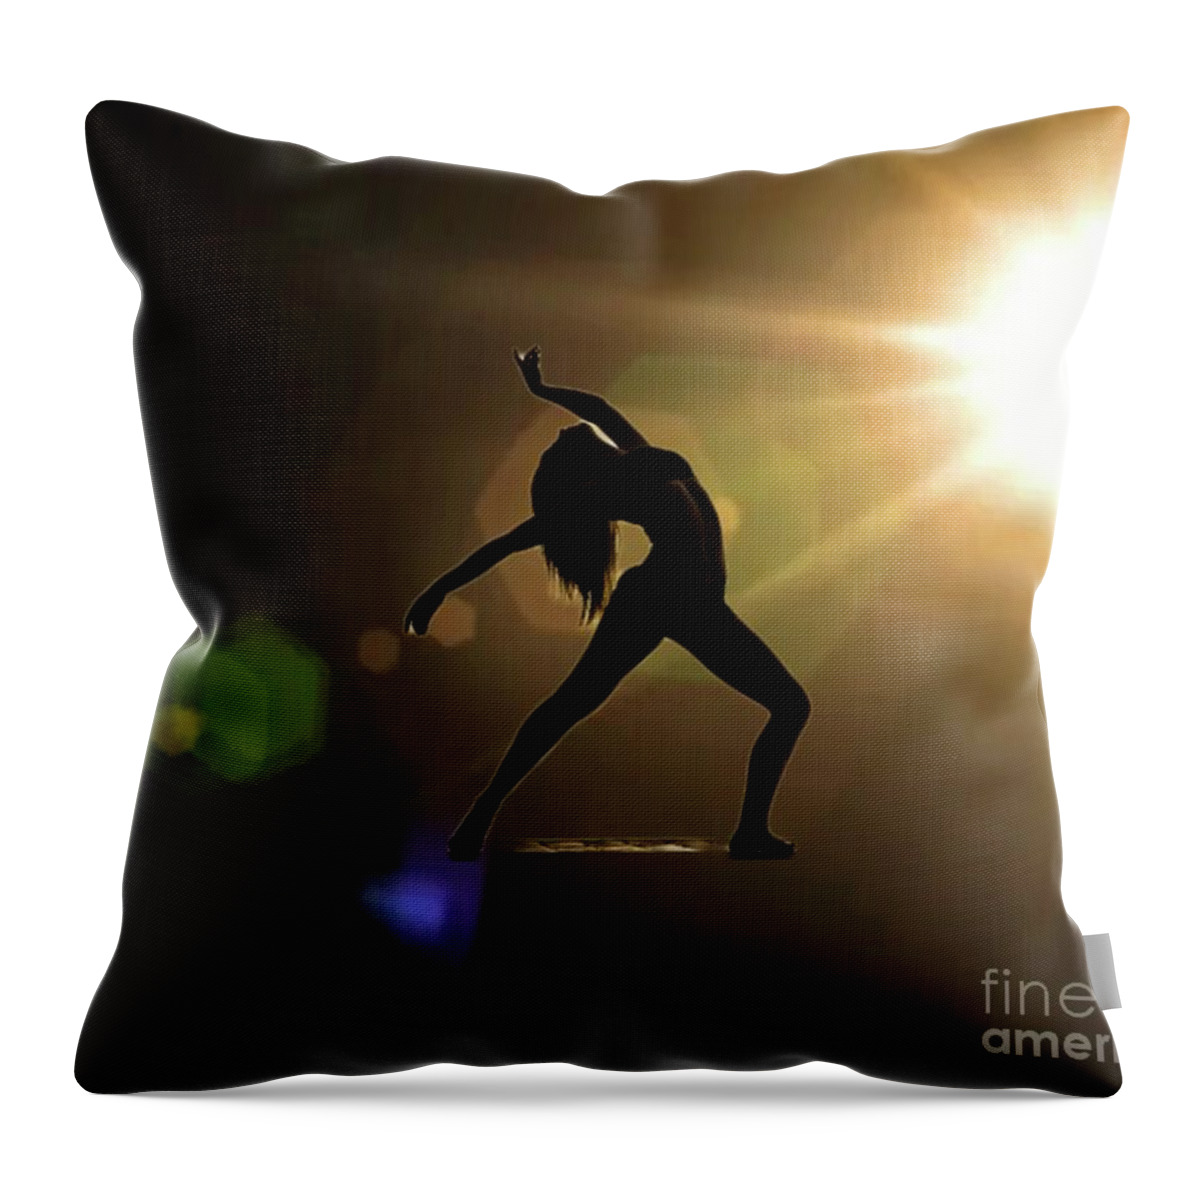  Throw Pillow featuring the mixed media Dance of the light by Yvonne Padmos